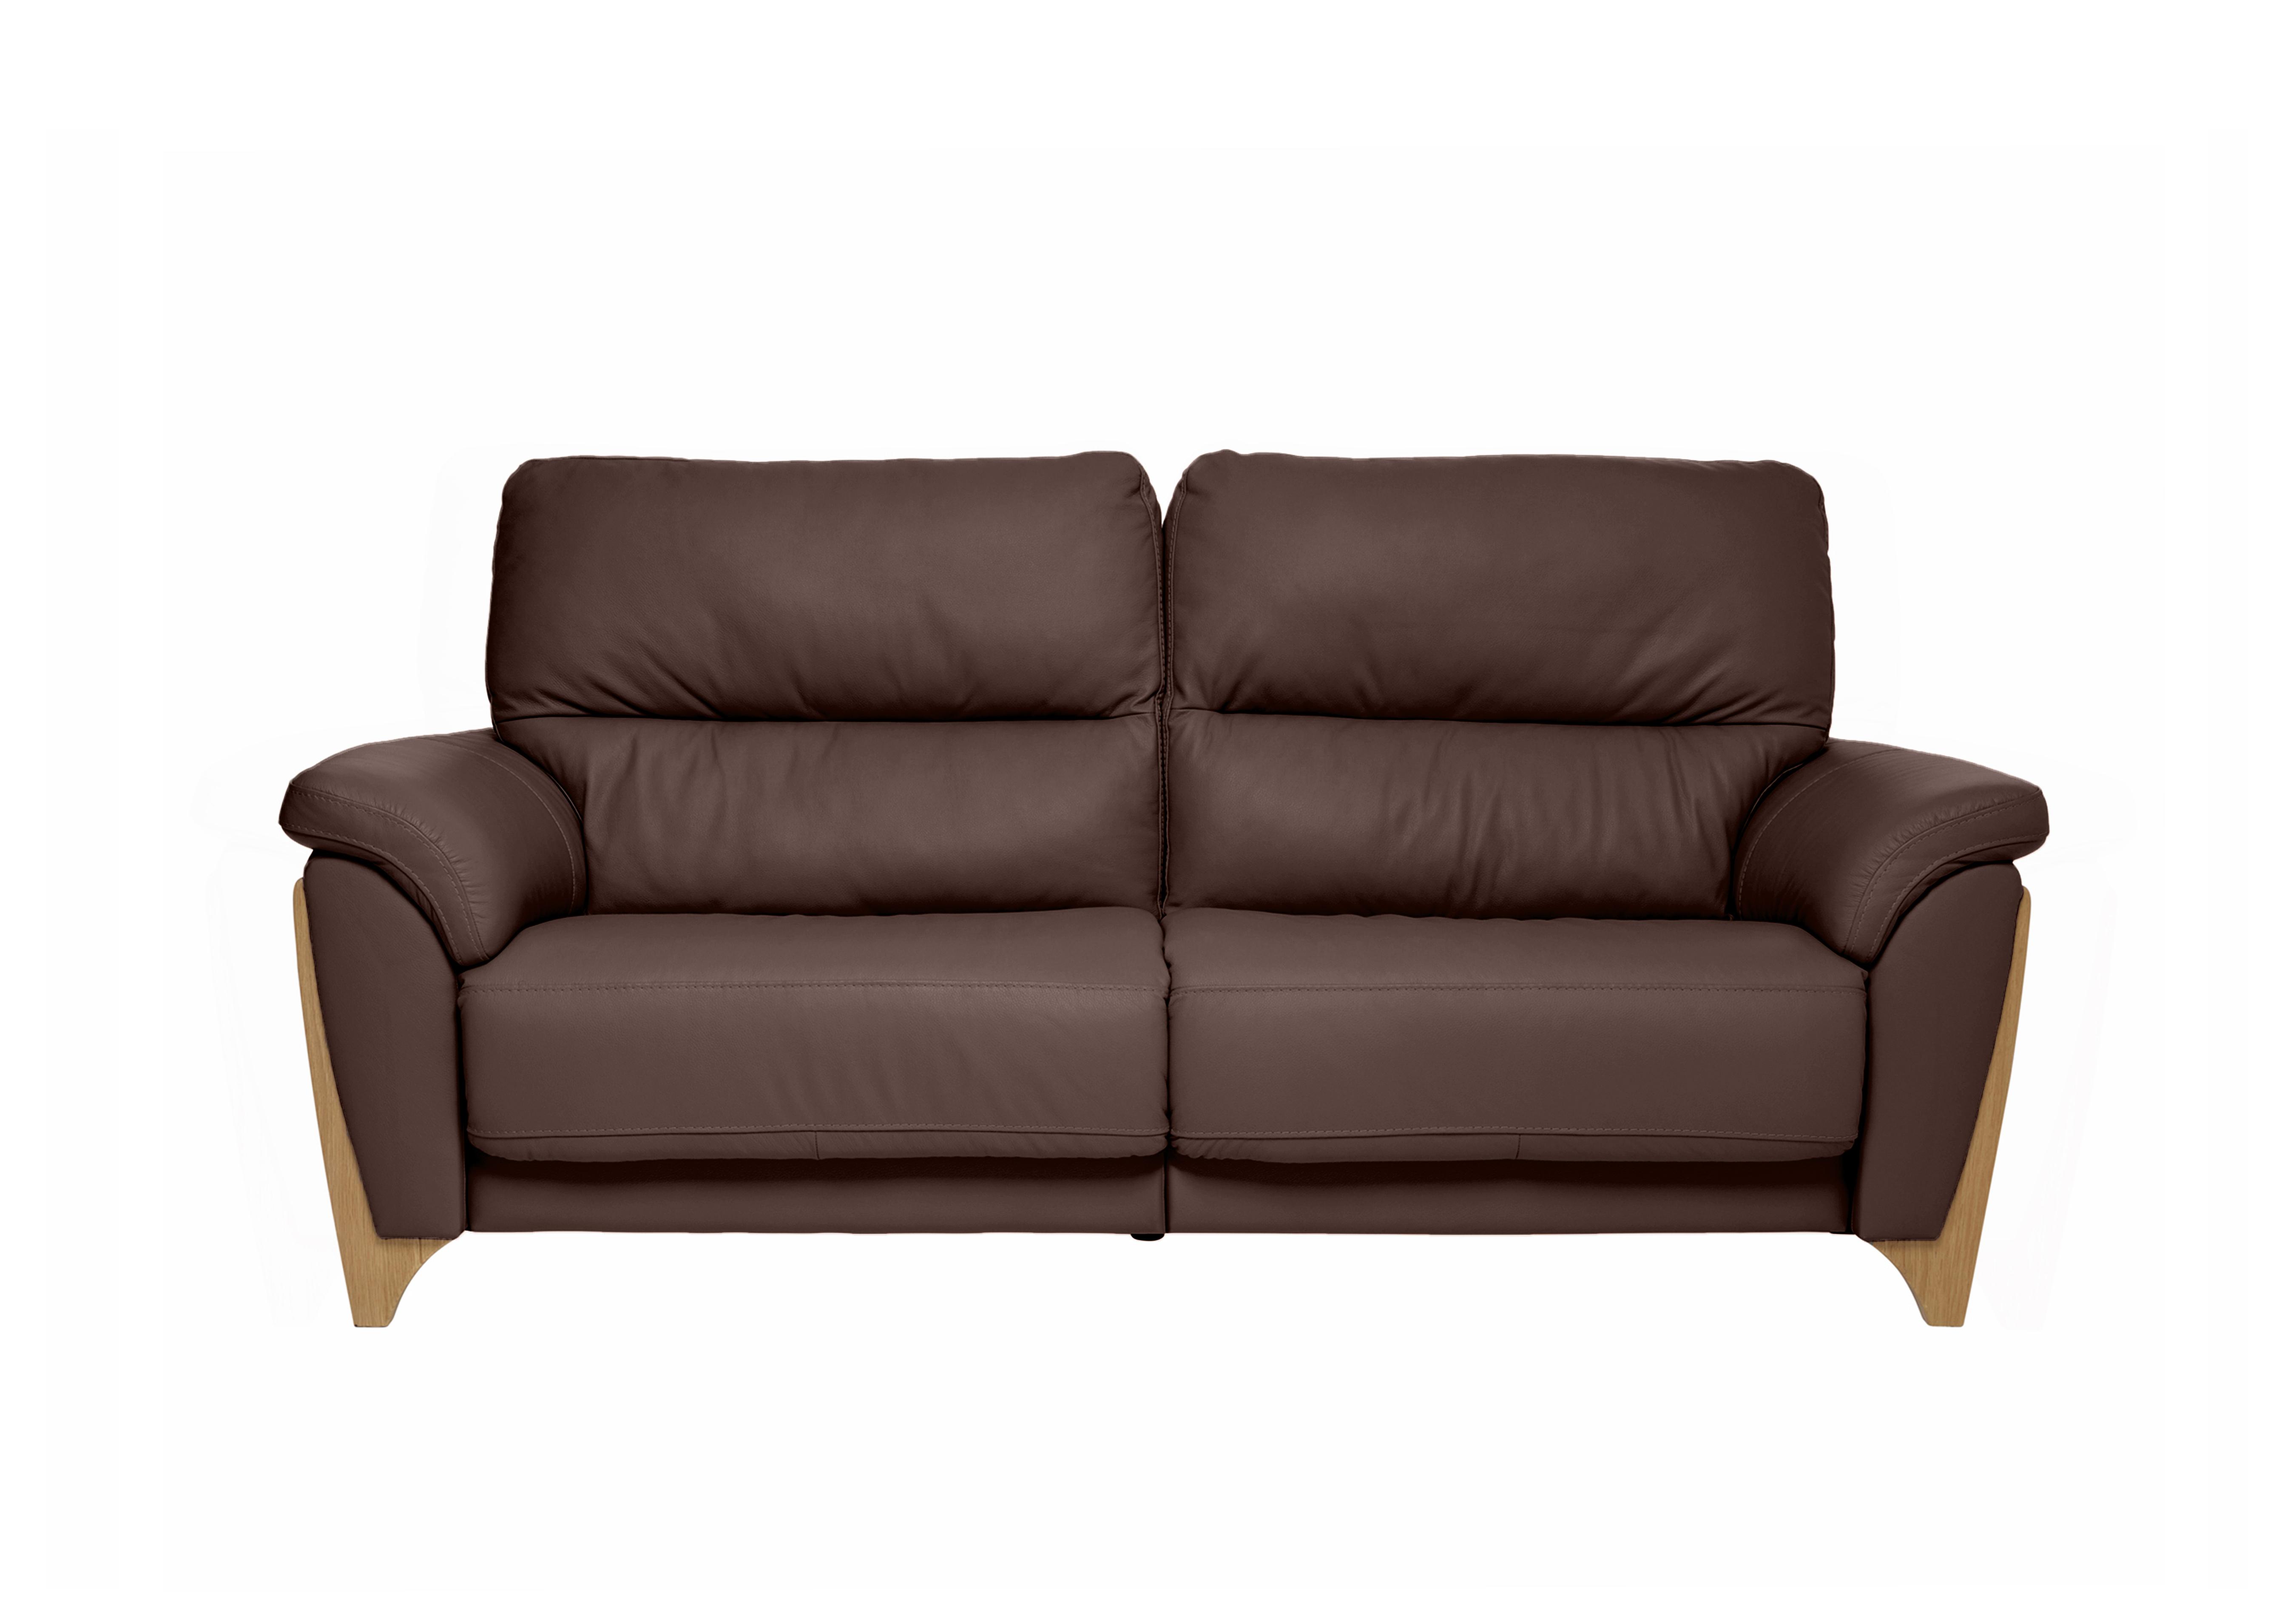 Enna Large Leather Power Recliner Sofa in L901 on Furniture Village